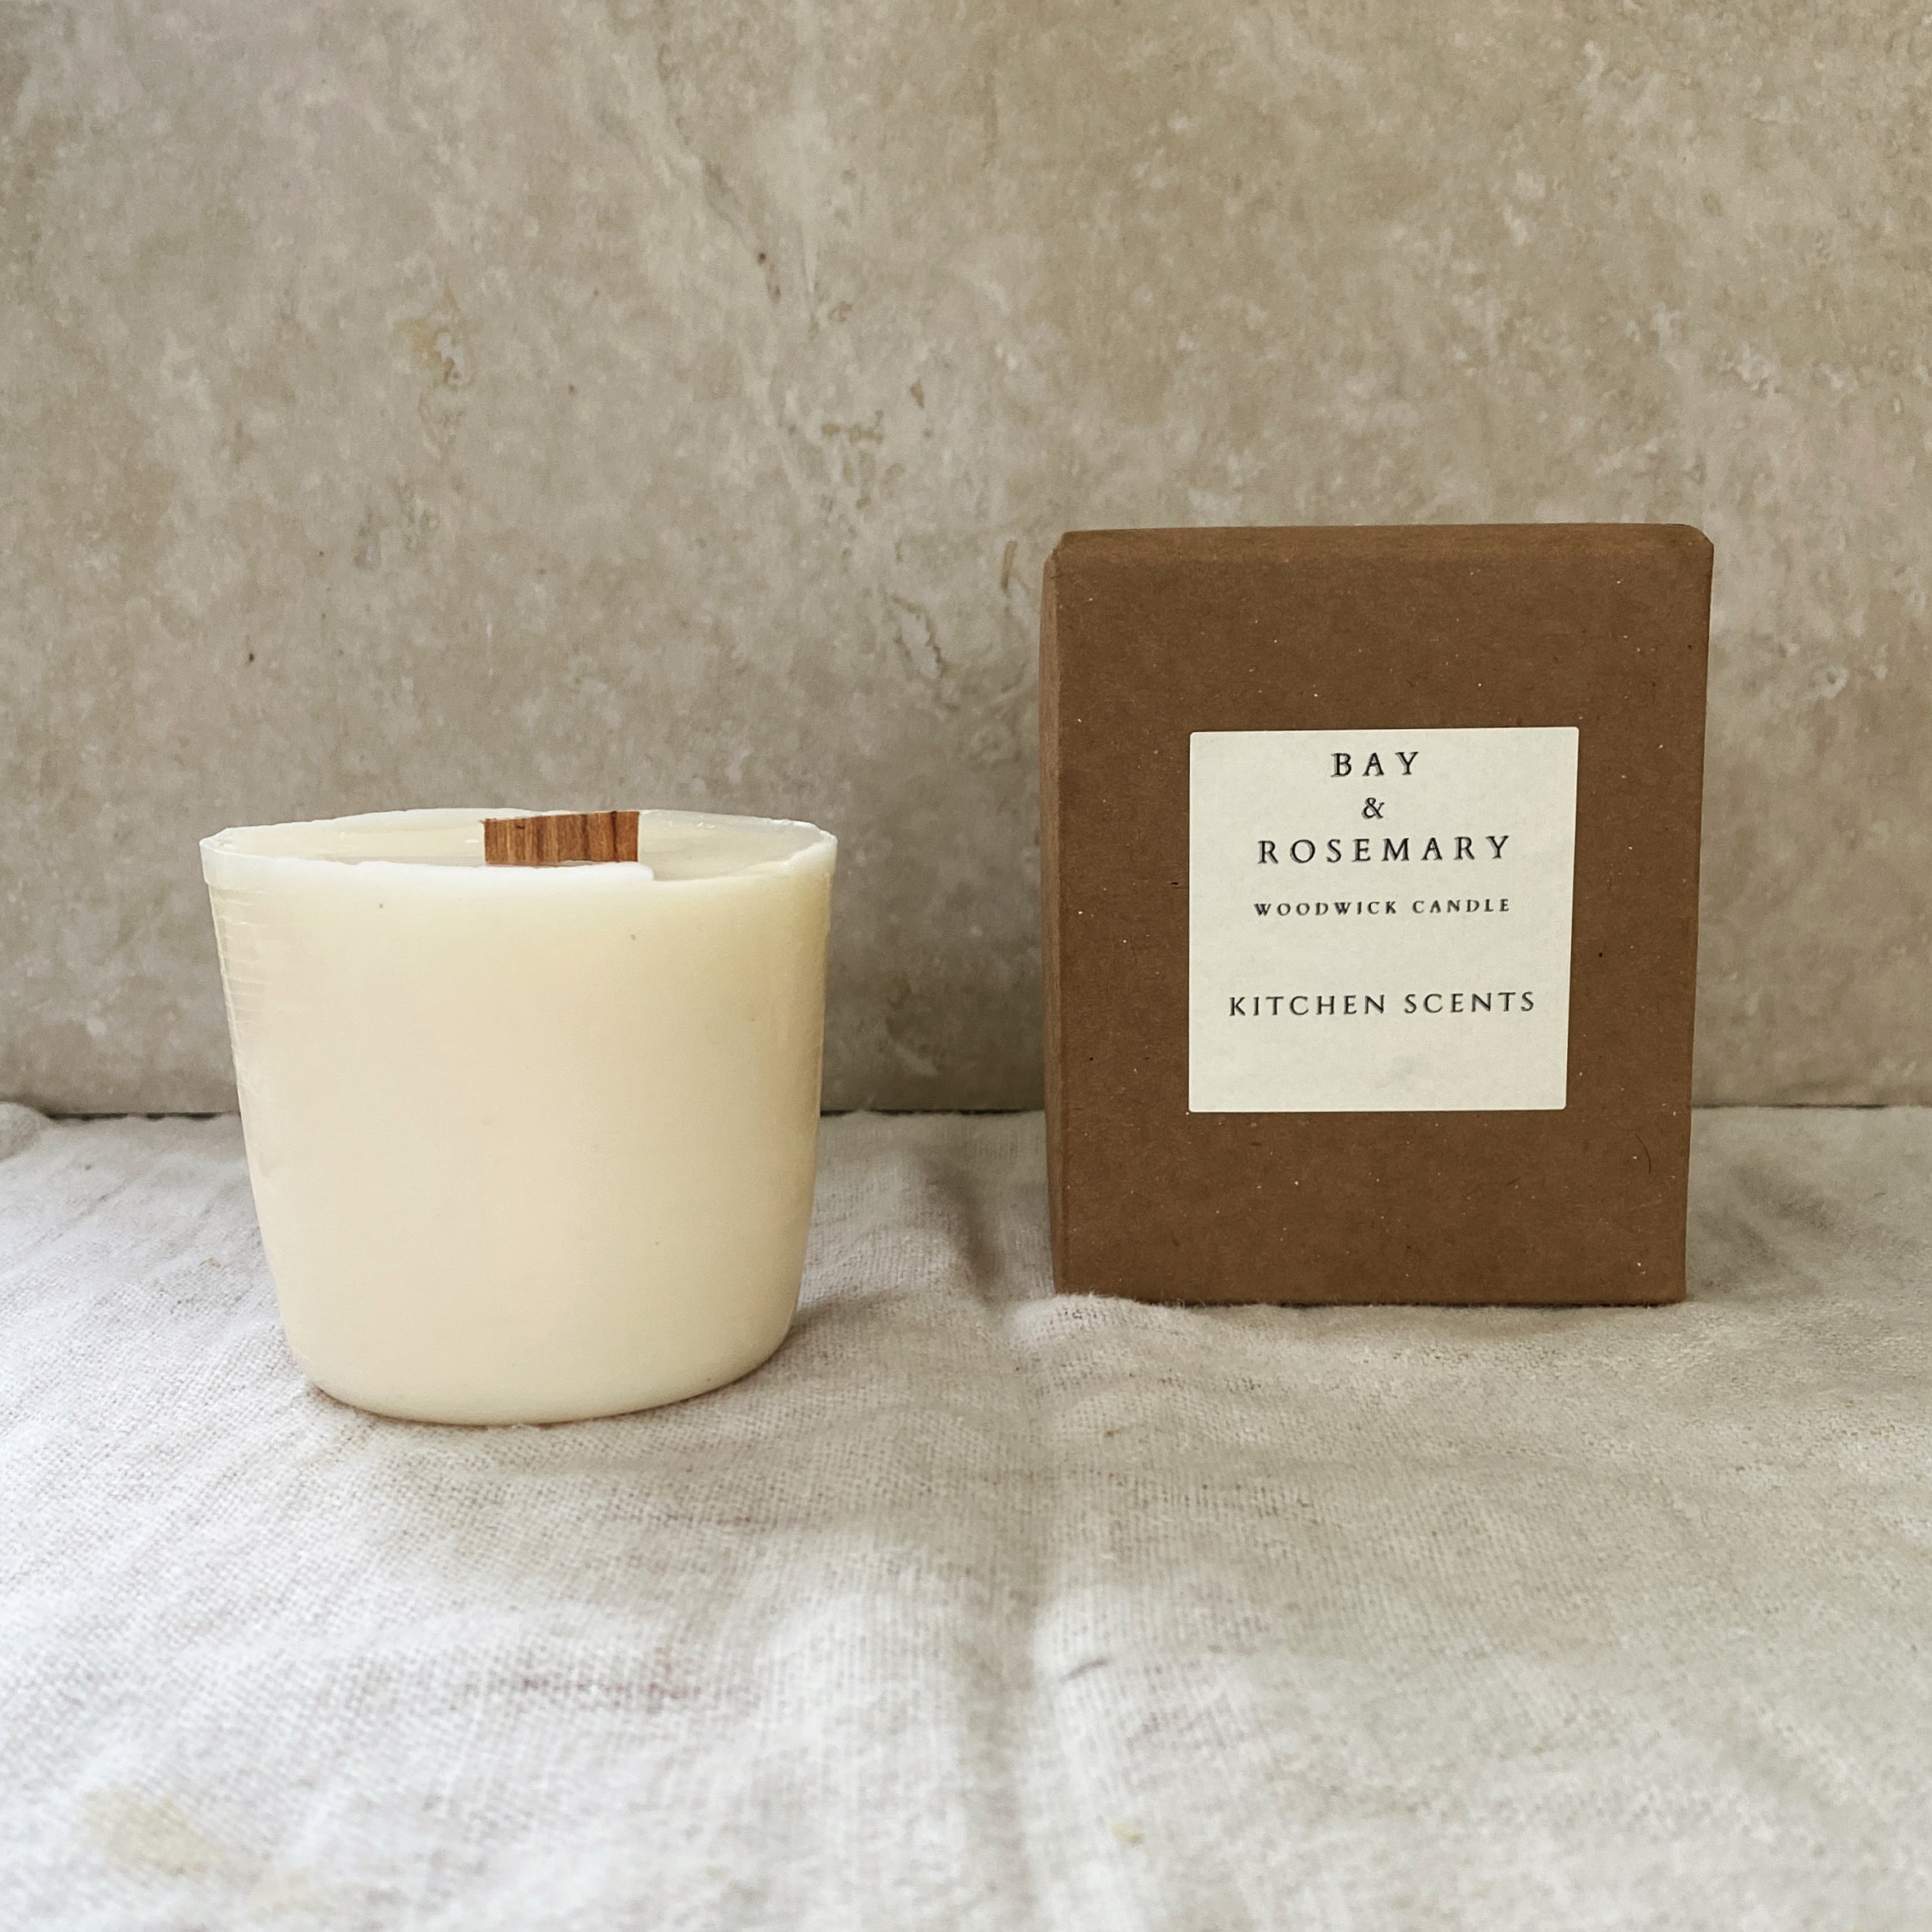 bay & rosemary scented soy wax wood wick candle refill